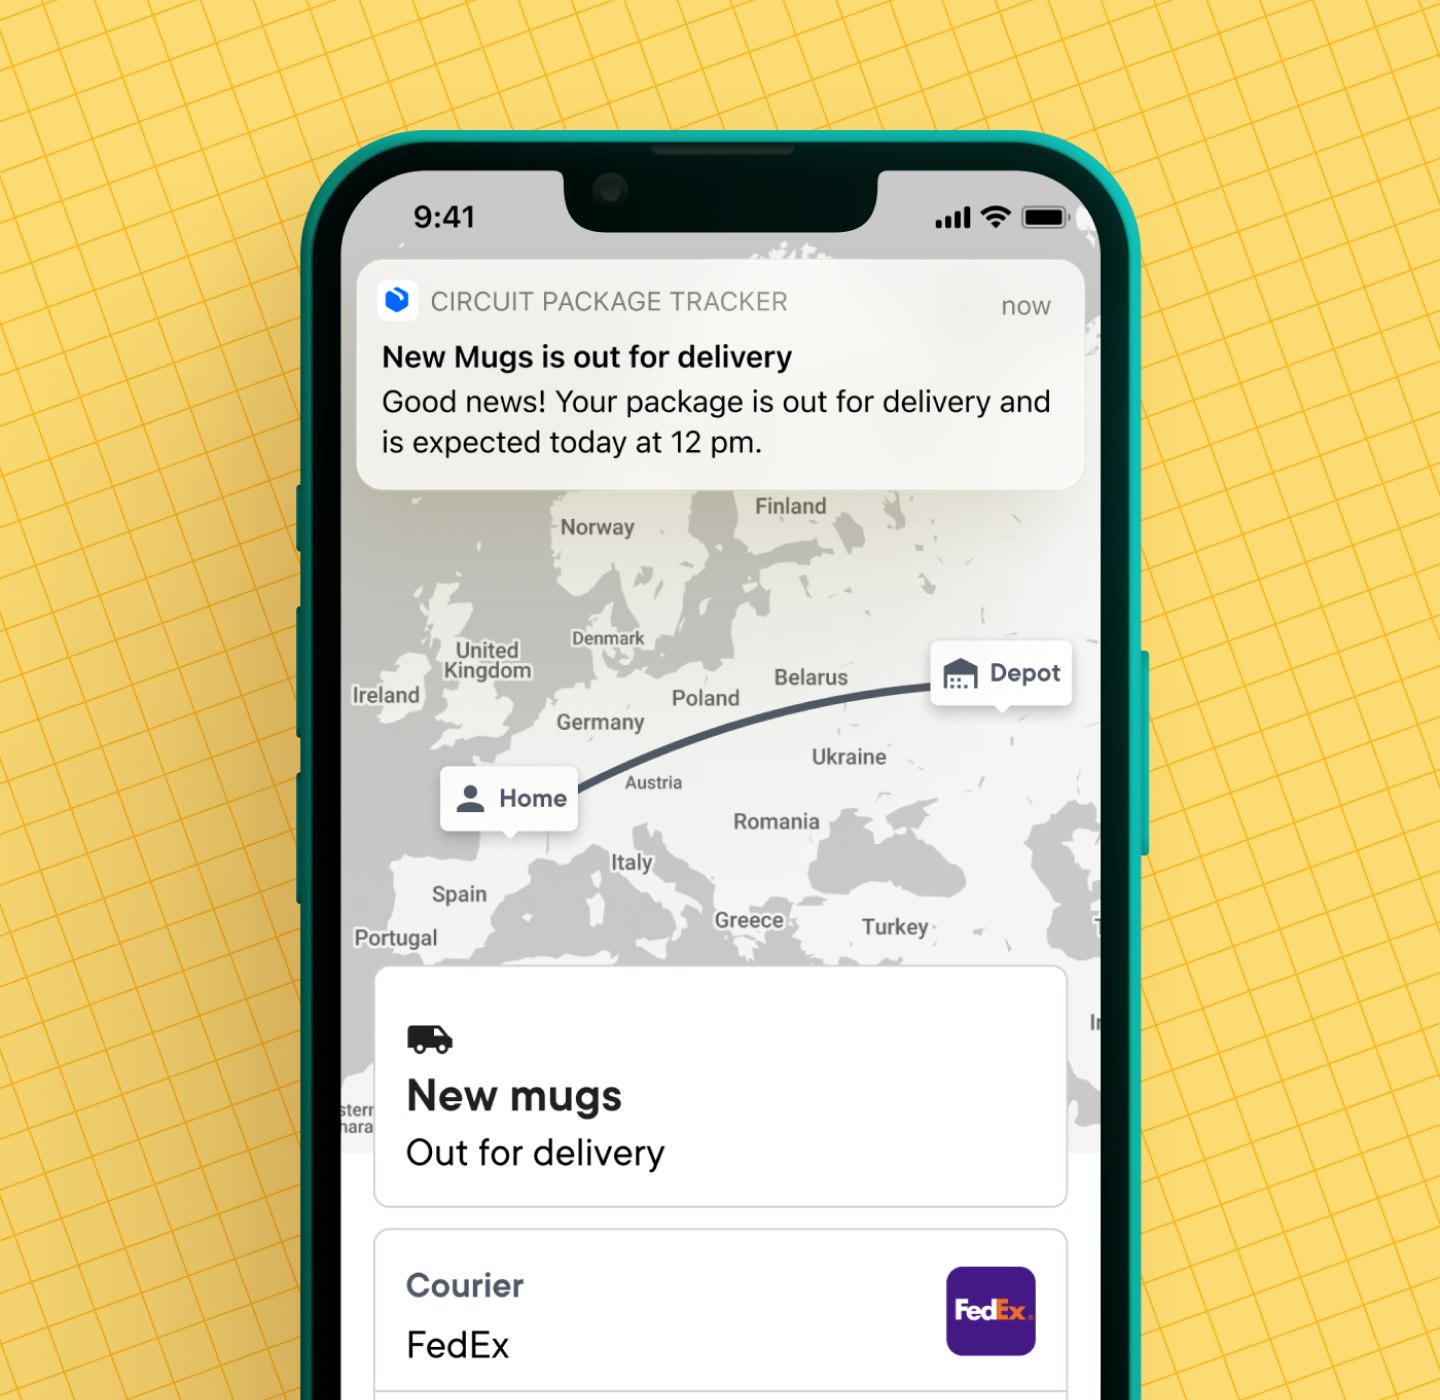 Smartphone notification from Circuit Package Tracker indicating 'New Mugs' package is out for delivery by FedEx with expected arrival at 12 pm, displayed over a map background